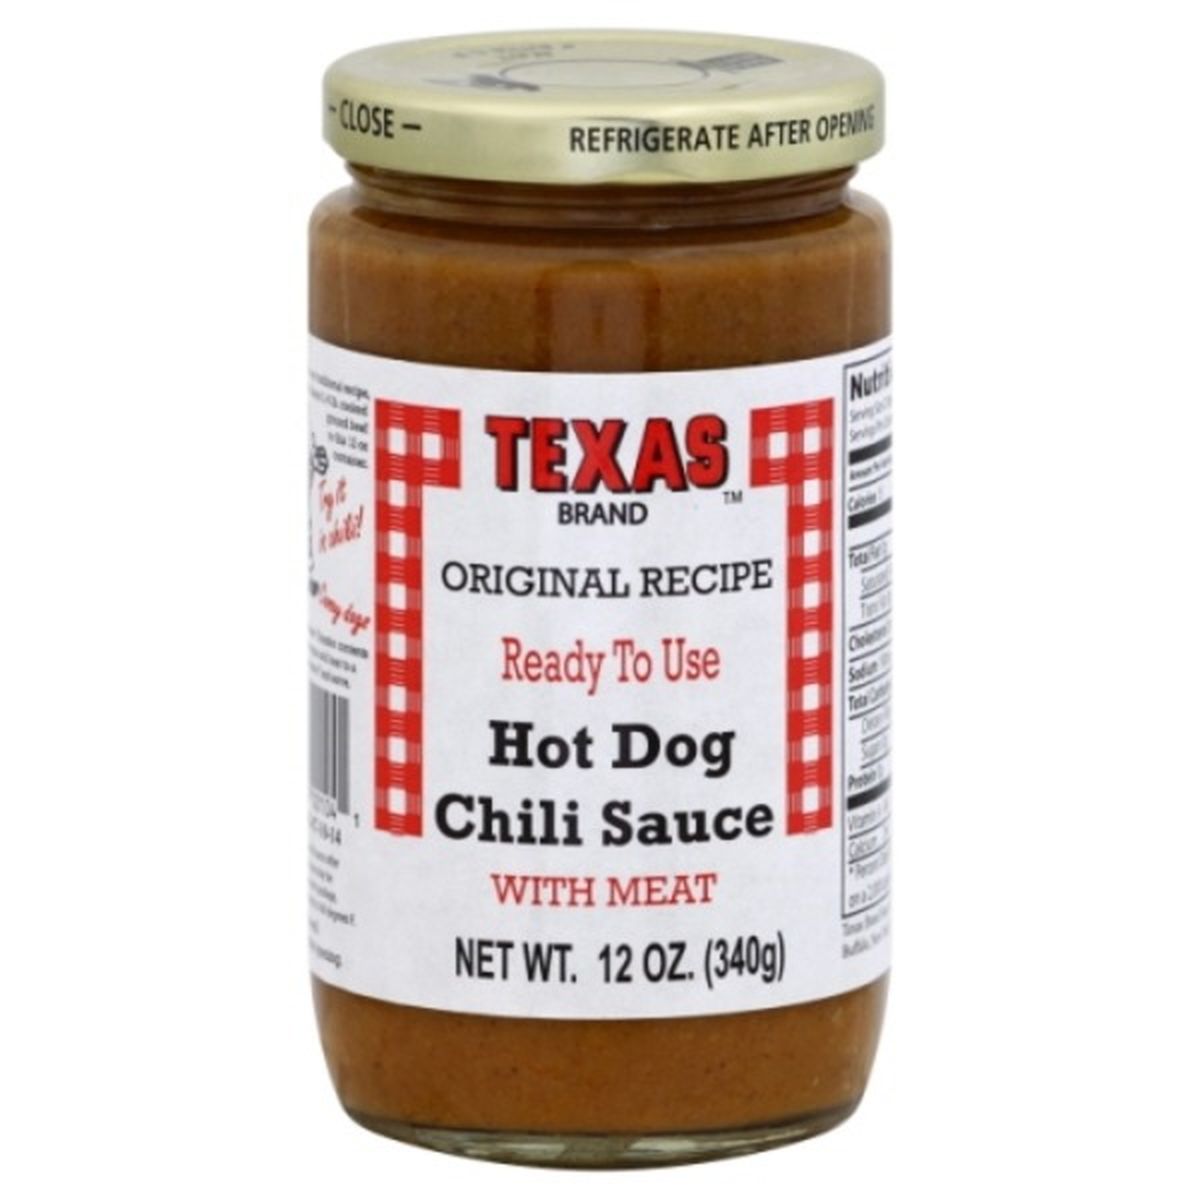 Calories in Texas Brand Honey Chili Sauce, Hot Dog, with Meat, Original Recipe